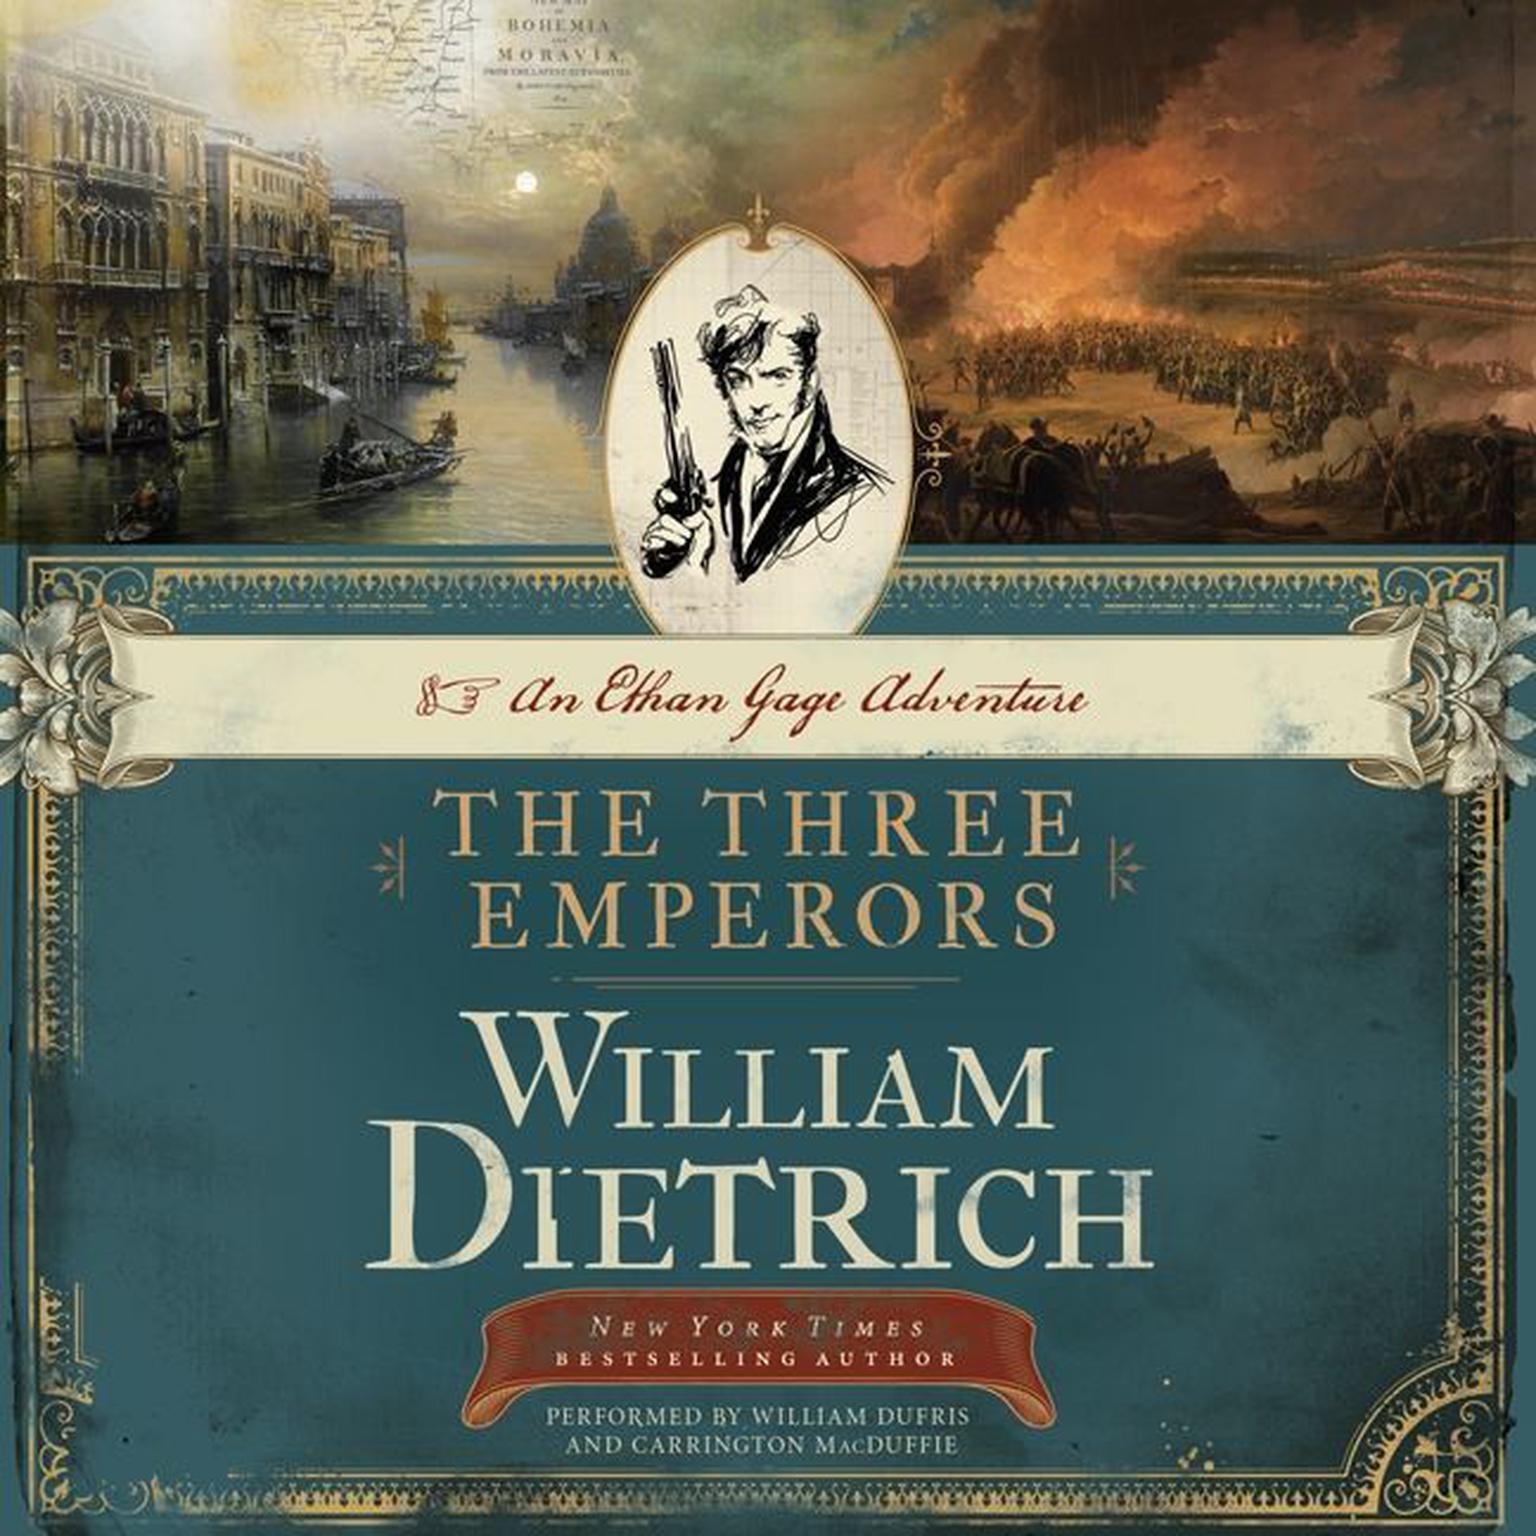 The Three Emperors: An Ethan Gage Adventure Audiobook, by William Dietrich